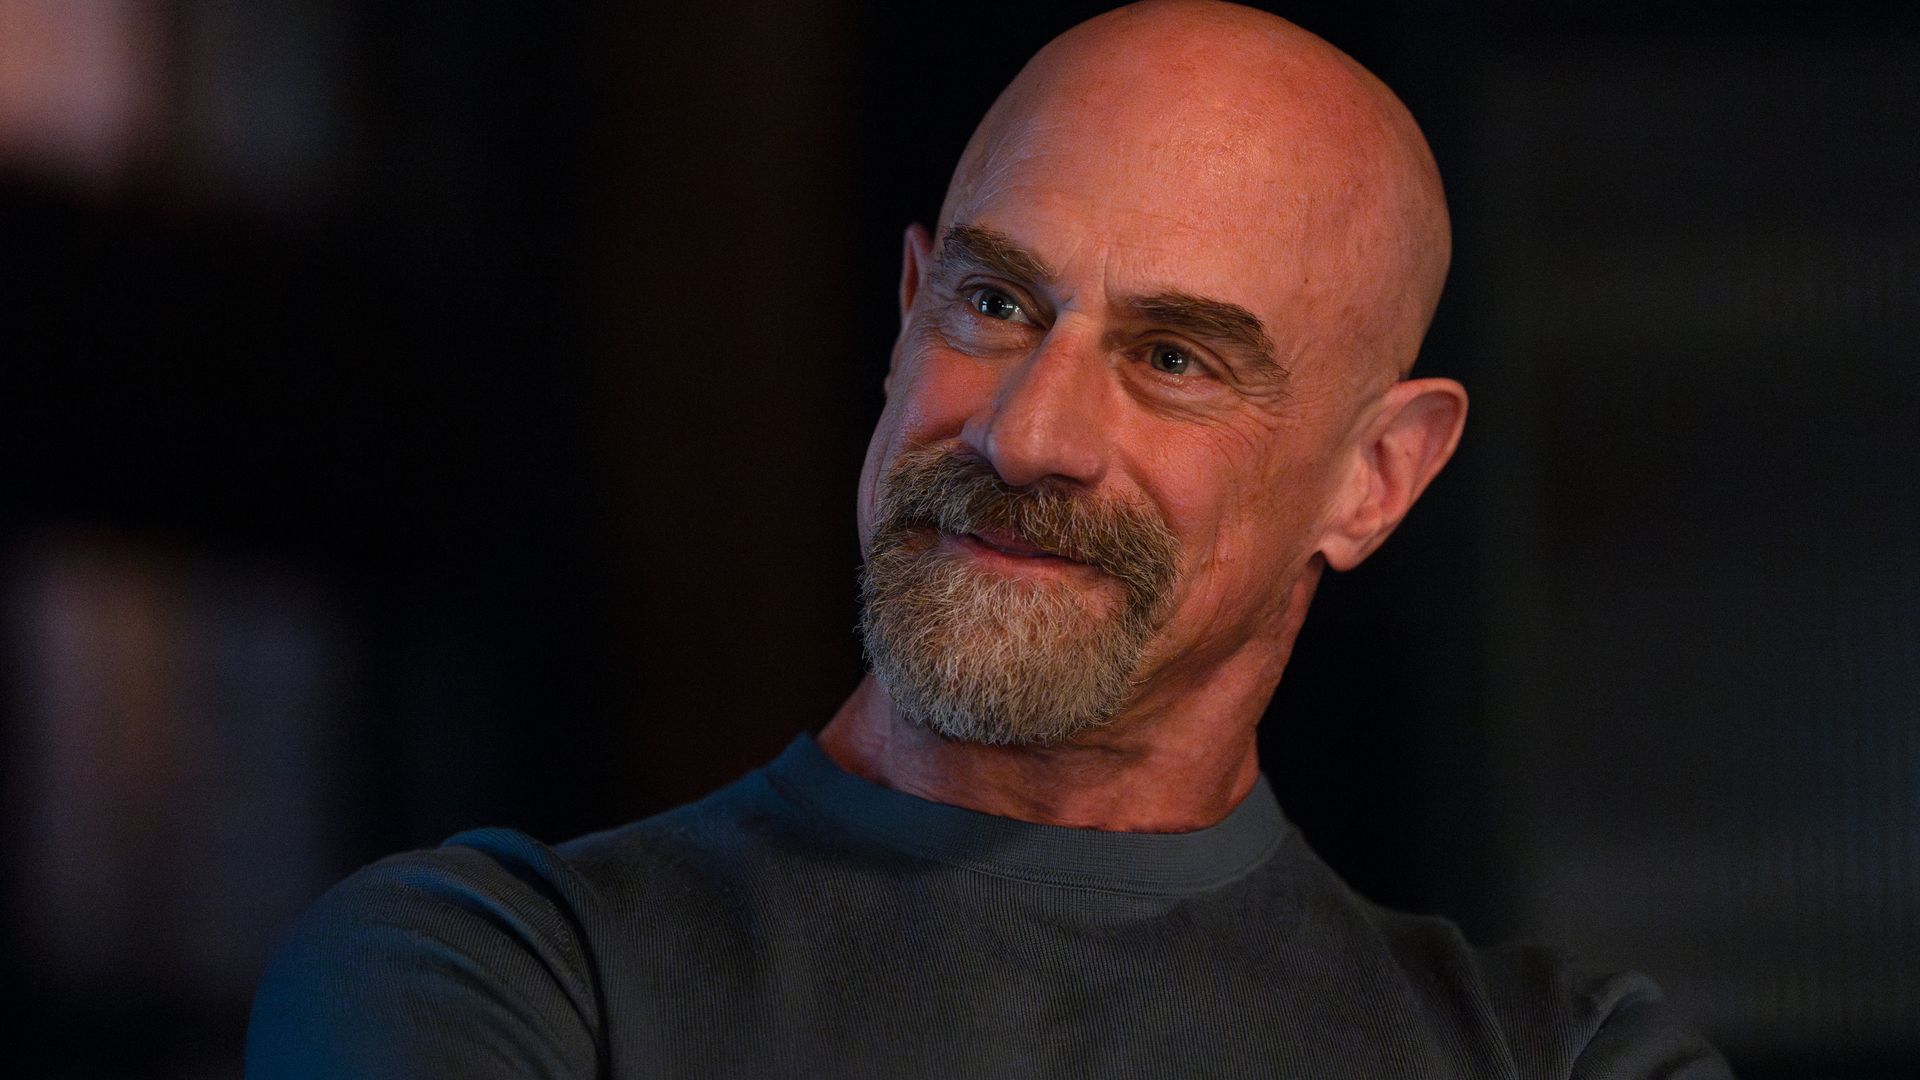 LAW & ORDER: ORGANIZED CRIME -- "Sins Of Our Father" Episode 408 -- Pictured: Christopher Meloni as Det. Elliot Stabler -- (Photo by: Virginia Sherwood/NBC via Getty Images)